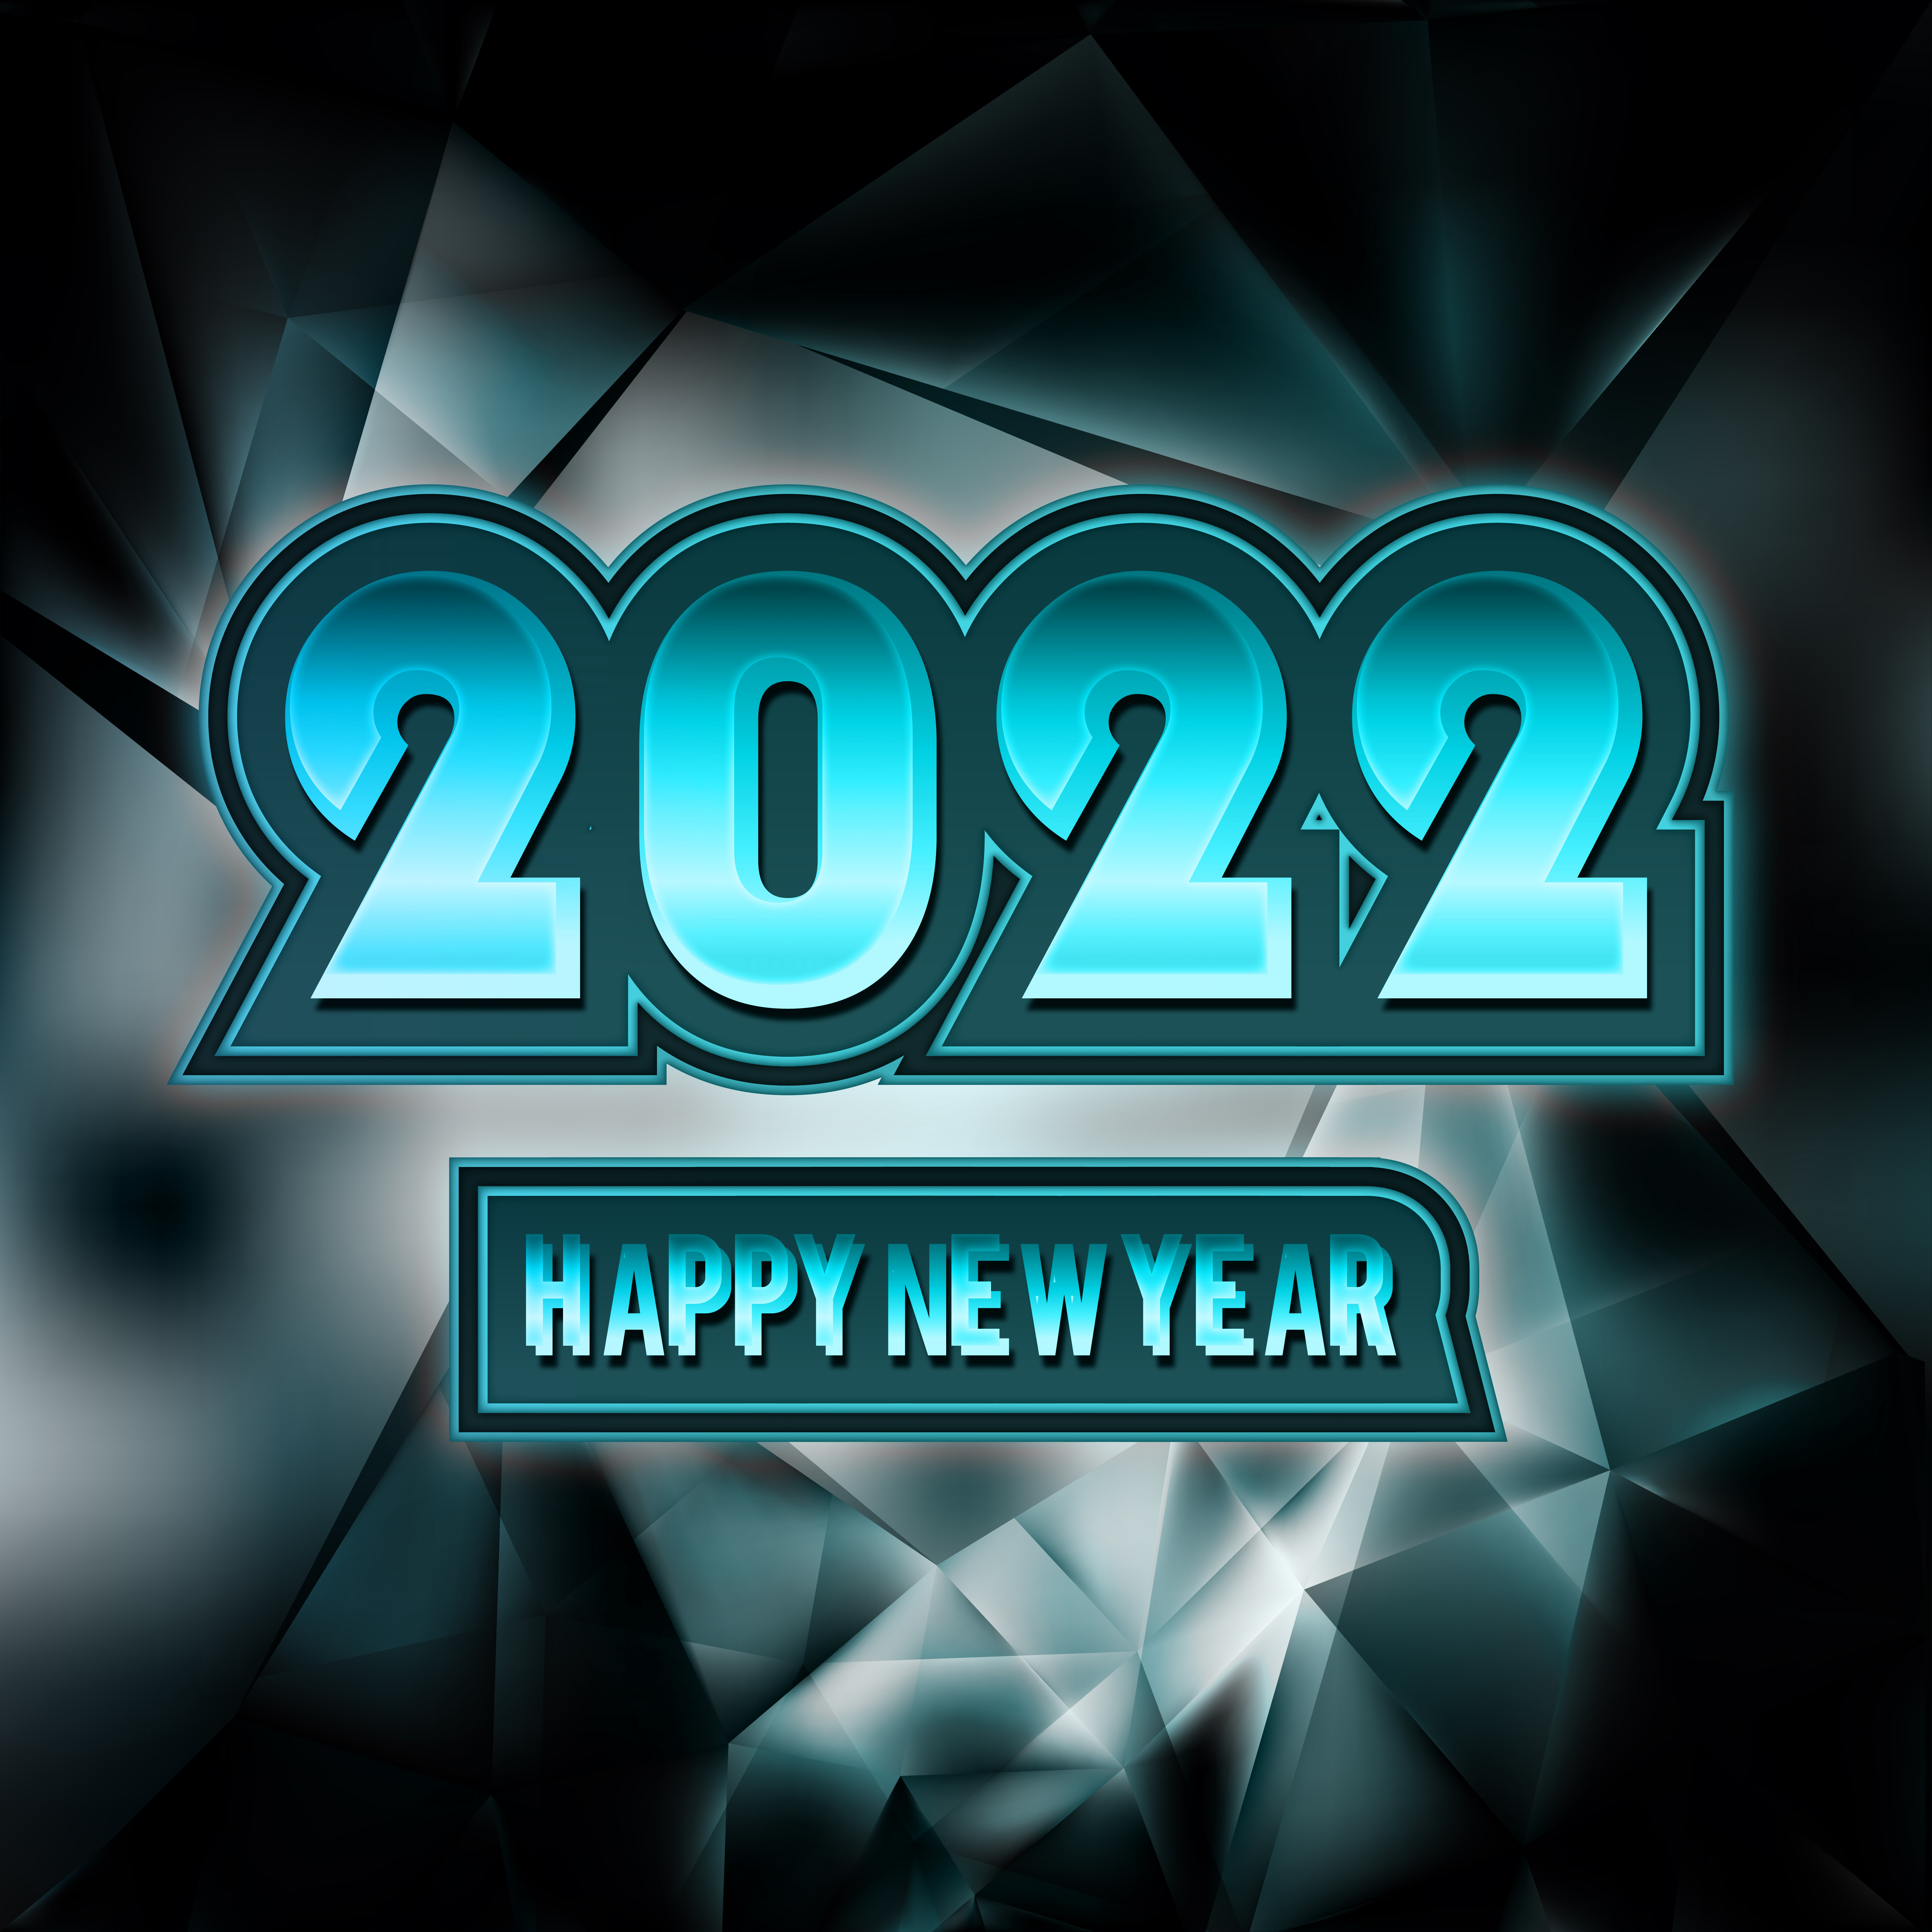 2022 Happy New Year Free Images